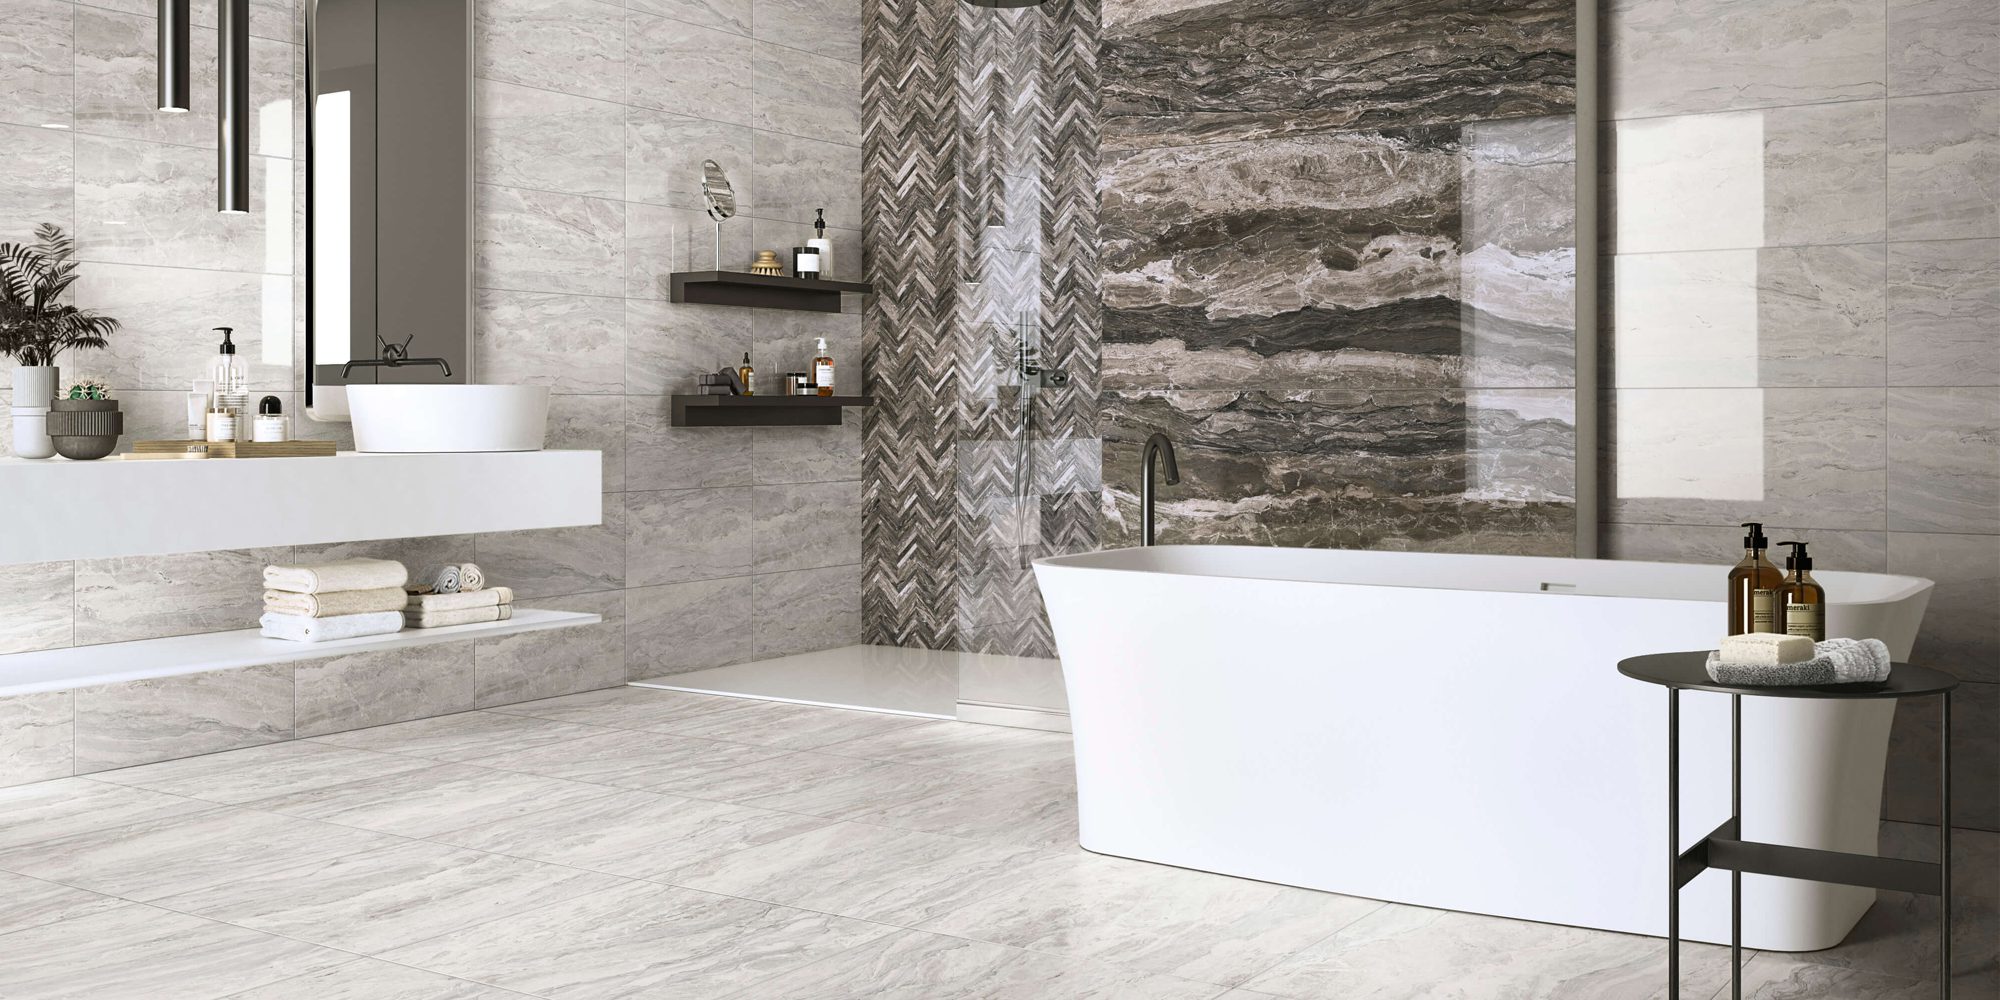 Ascot Gemstone Silver and Mink Polished installed on bathroom floors and walls.